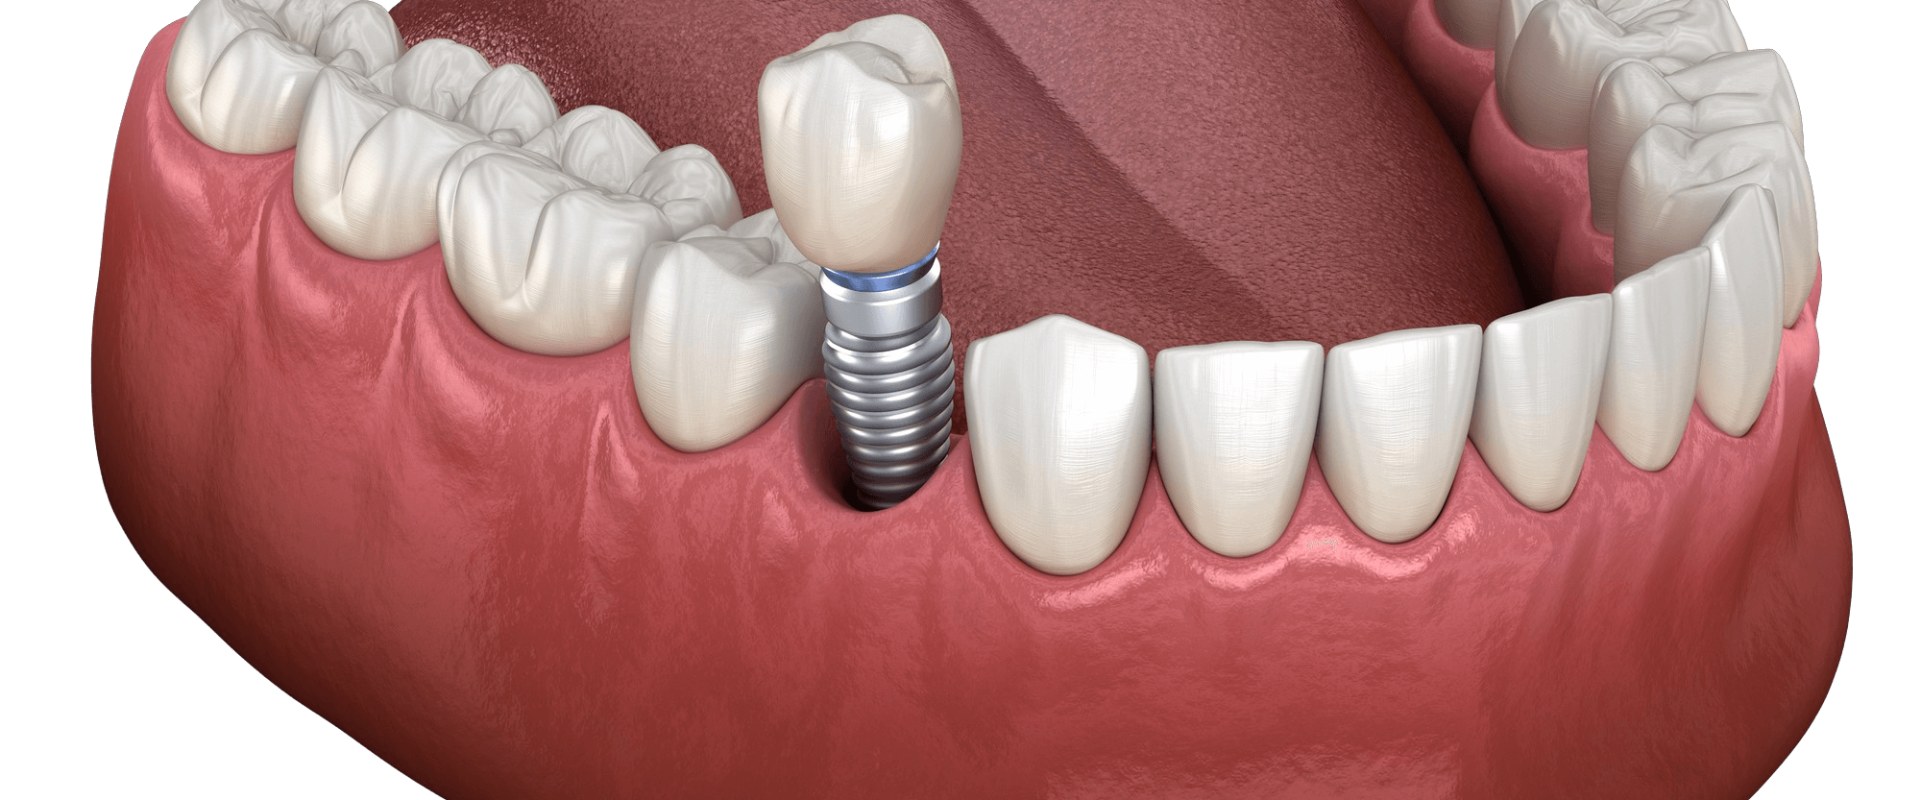 Exploring Discount Programs and Financing Options for Affordable Implant Supported Dentures